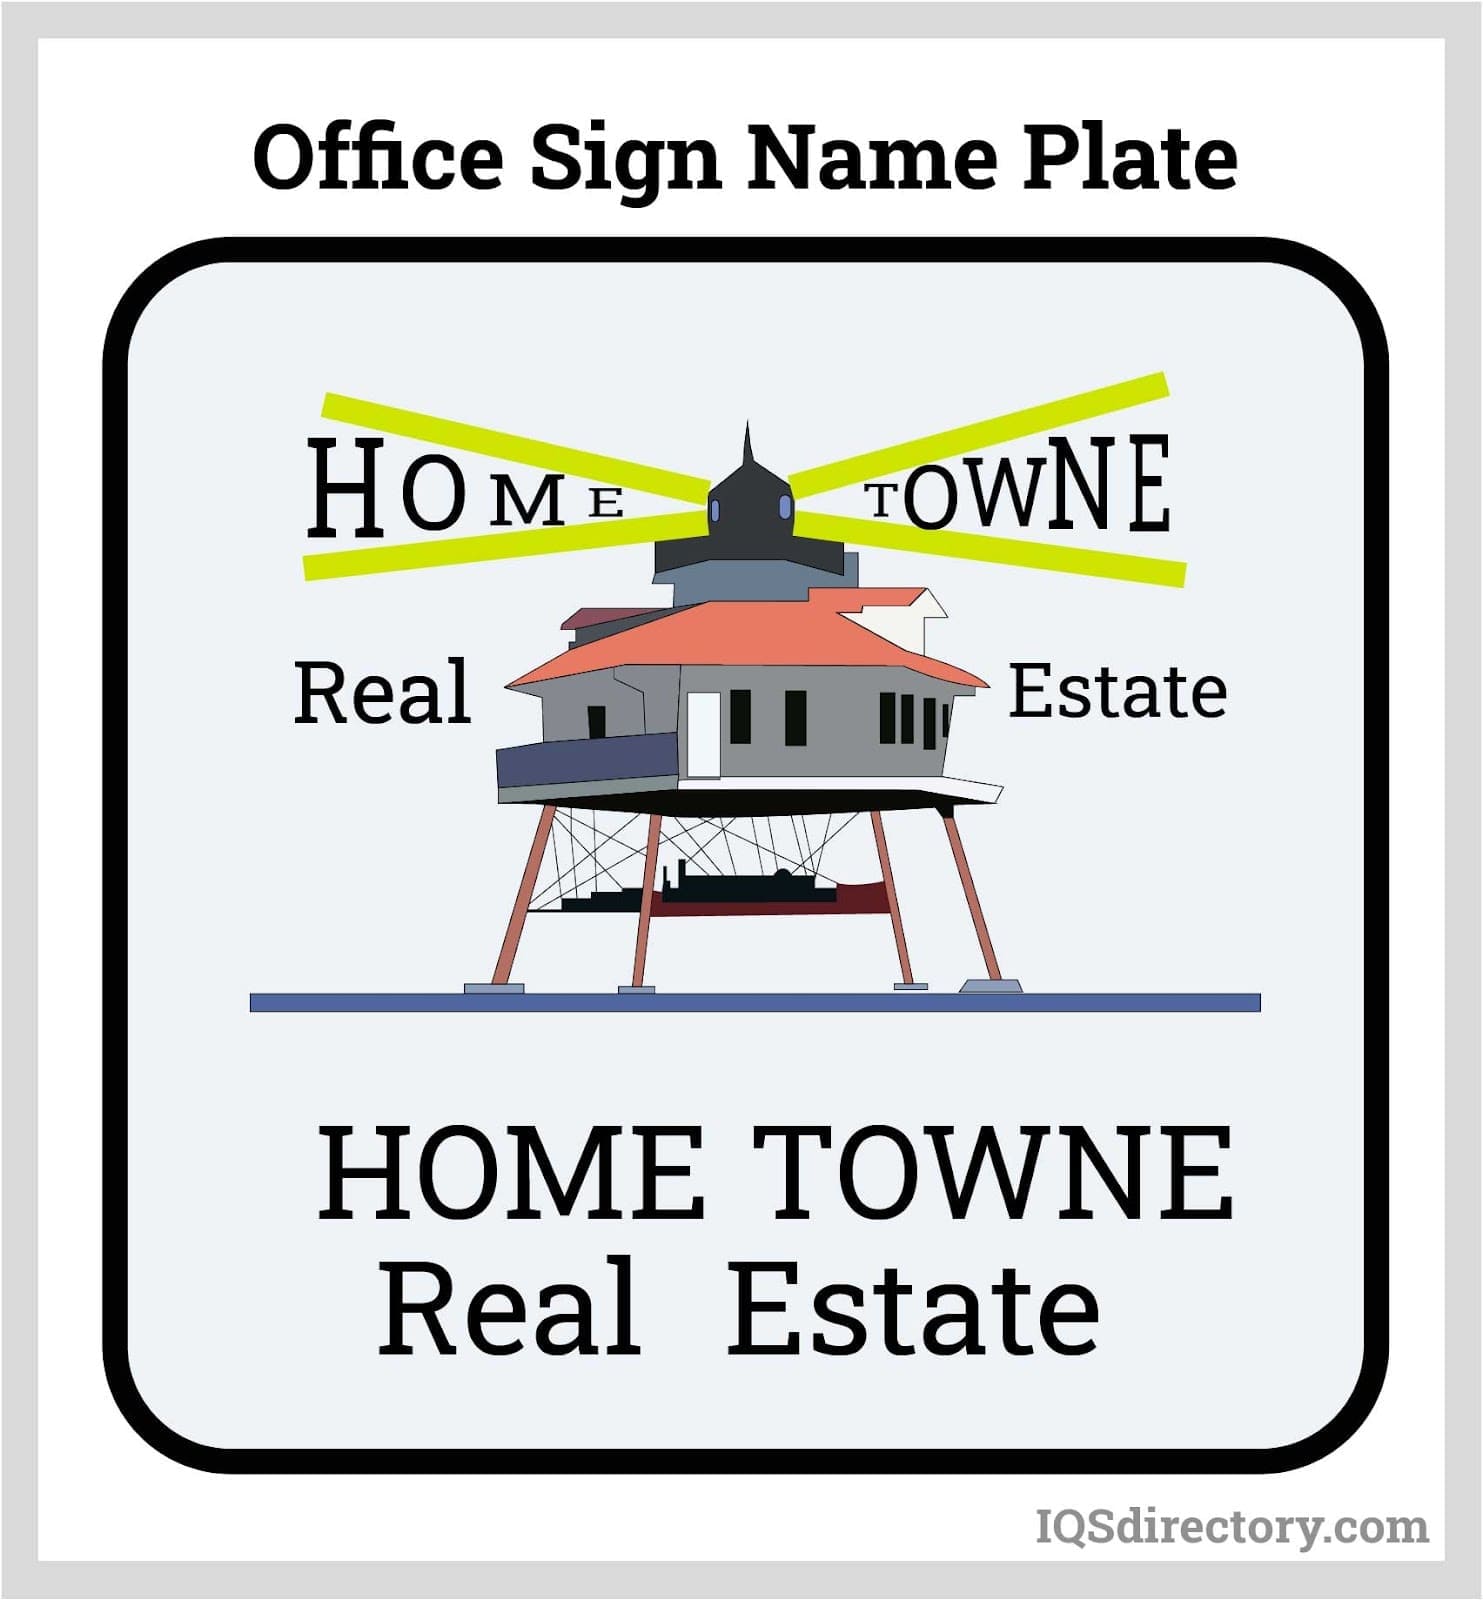 Office Sign Name Plate